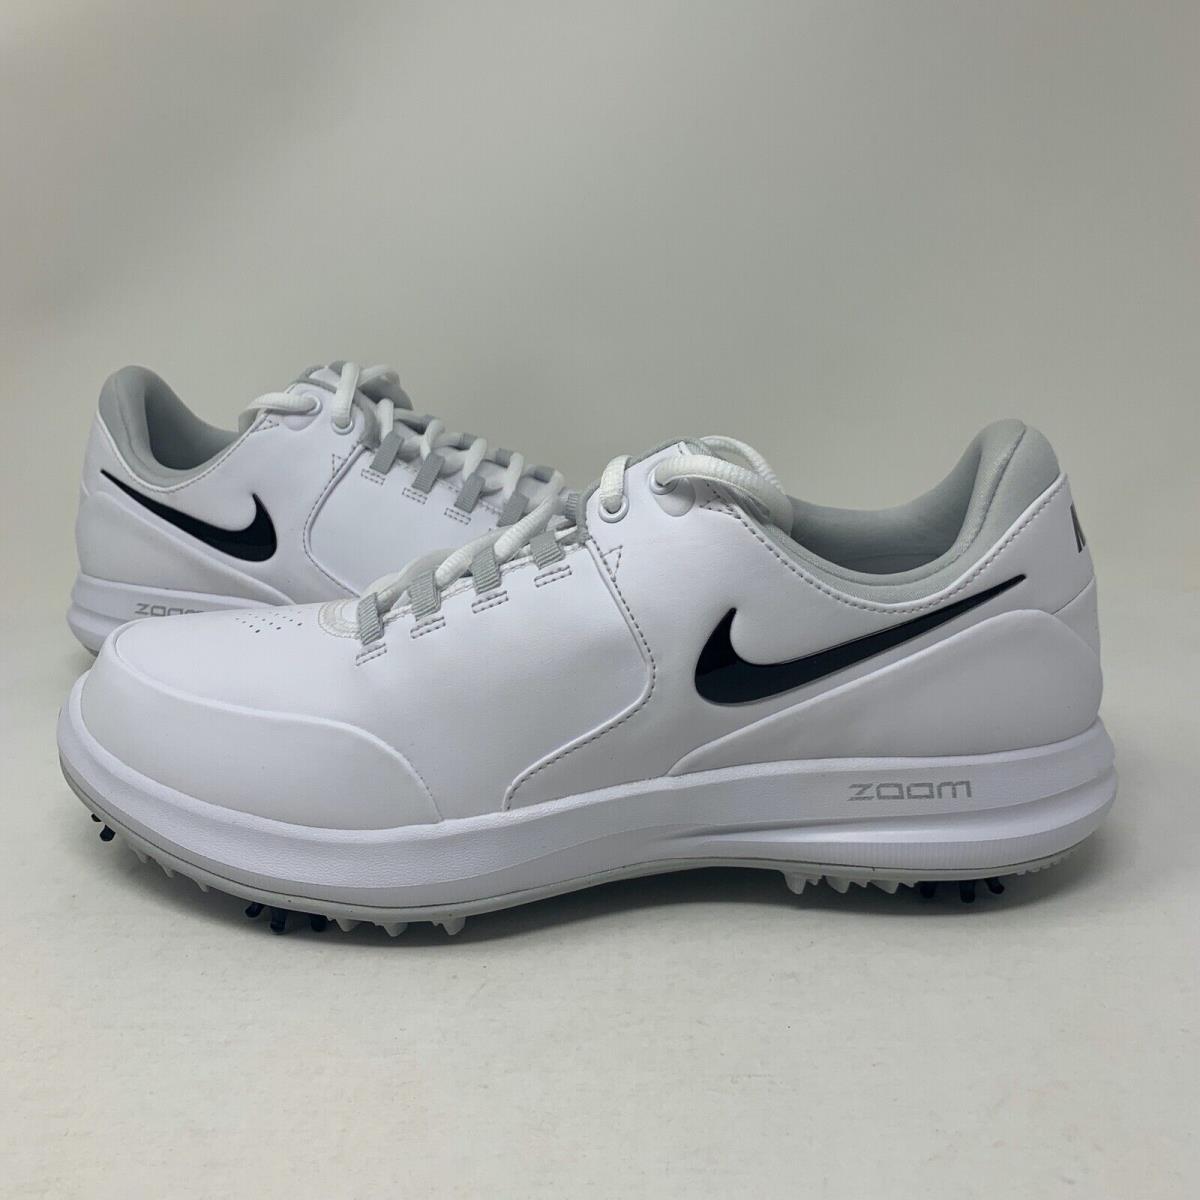 Inicialmente total familia real Nike Air Zoom Accurate Womens Golf Shoes White/black 909735-100 Size 10  Wide | 883212504845 - Nike shoes Air Zoom Accurate - White | SporTipTop